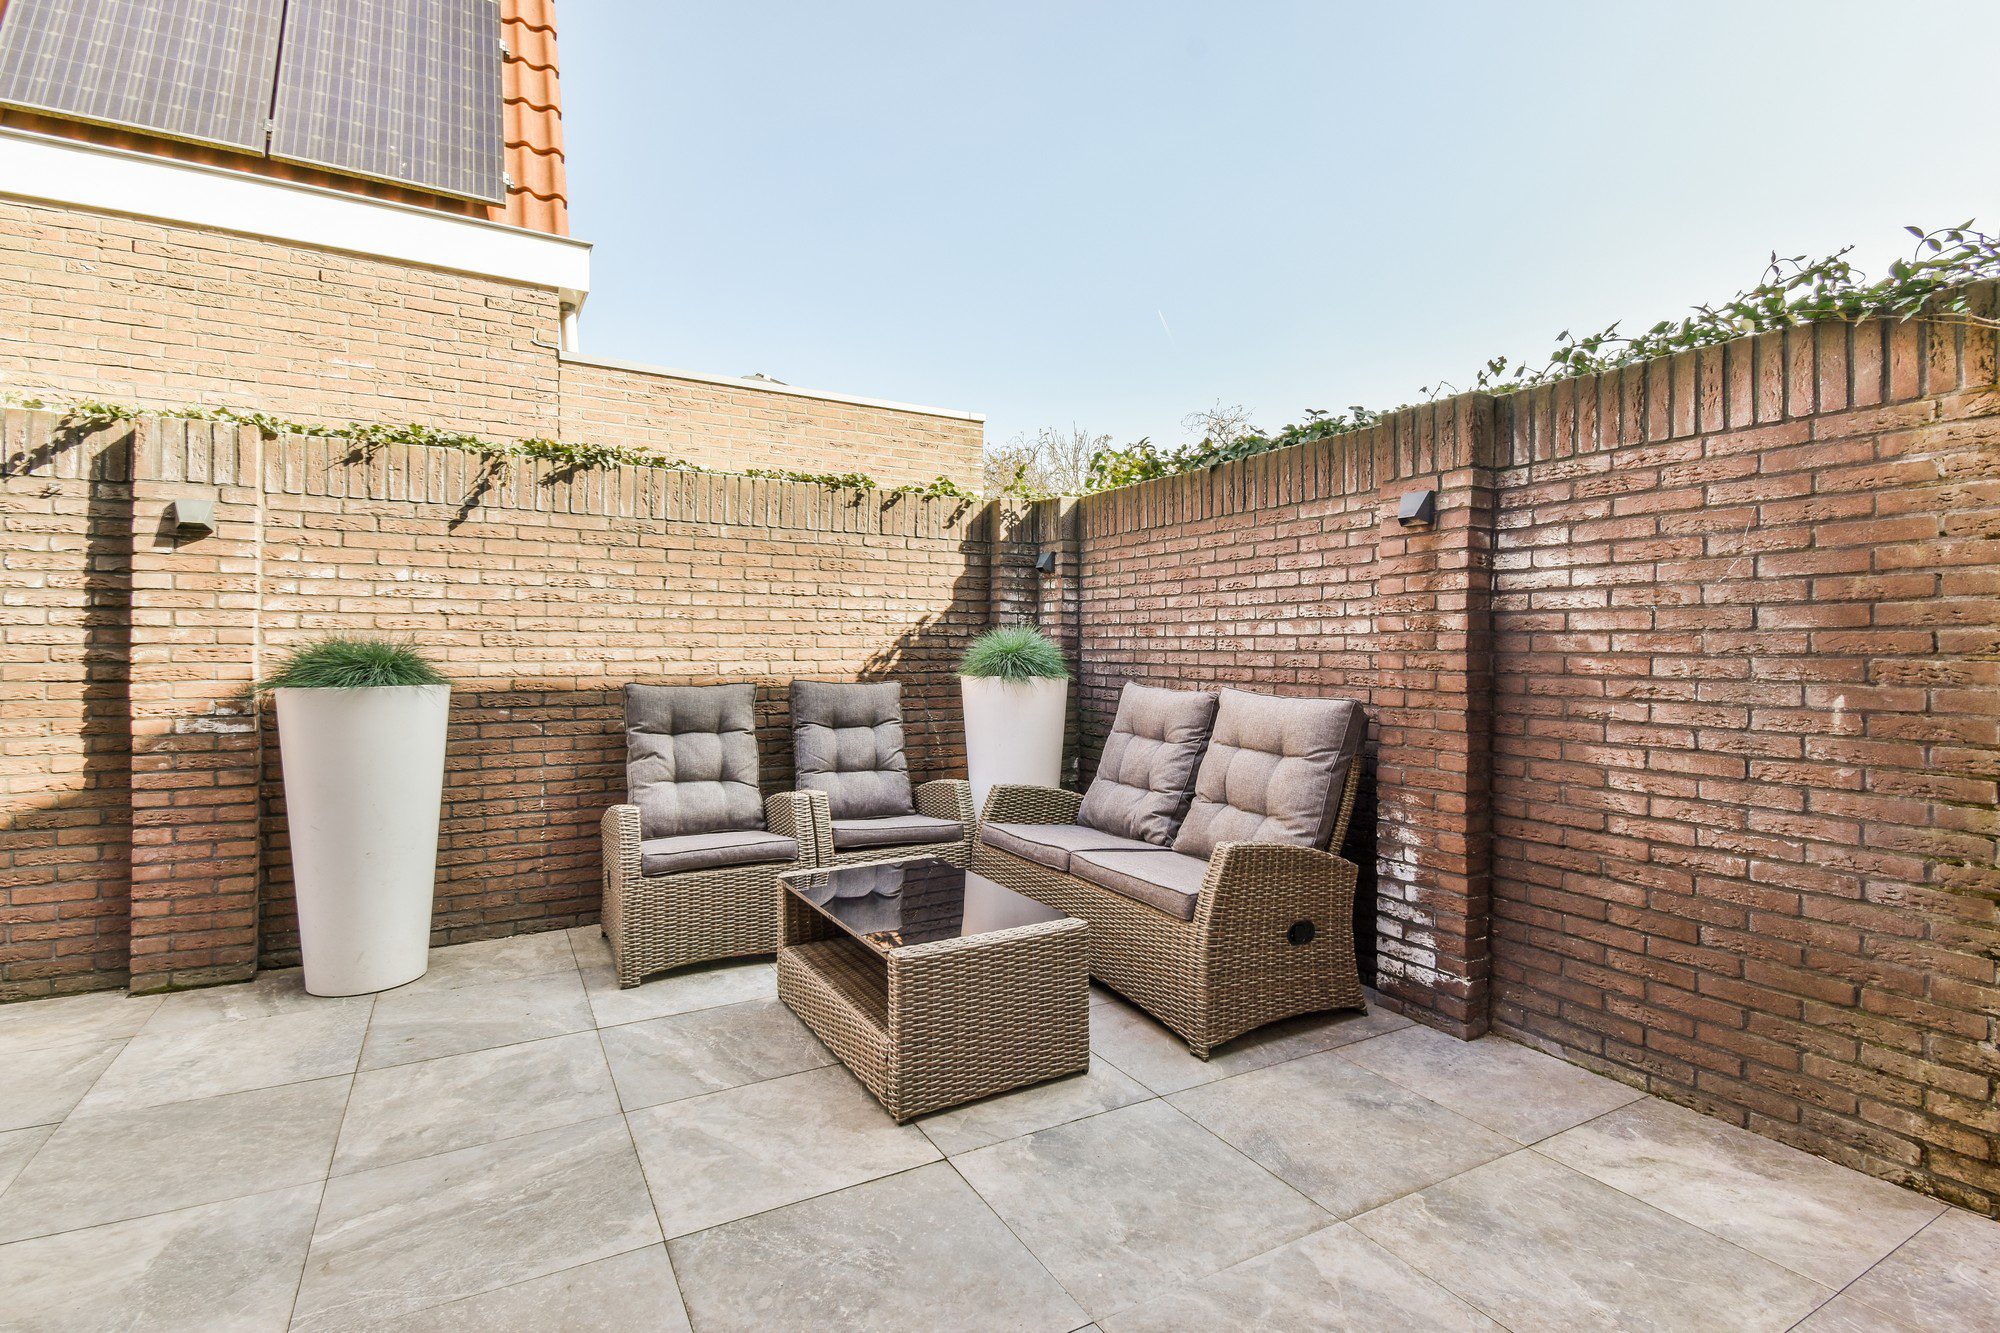 The image shows an outdoor patio area with a brick wall surrounding it. There is a set of wicker-style garden furniture that includes two single armchairs, one double sofa, and a small table with a glass top, all with matching cushions. In one corner, there's a tall white planter with a green plant in it. The patio floor is tiled with large stone-coloured tiles. You can also see parts of a building with a red tiled roof and what appears to be a solar panel installed. There are climbing plants partially covering the wall, and there is an outdoor light fixture on the wall. It's a bright and sunny day.